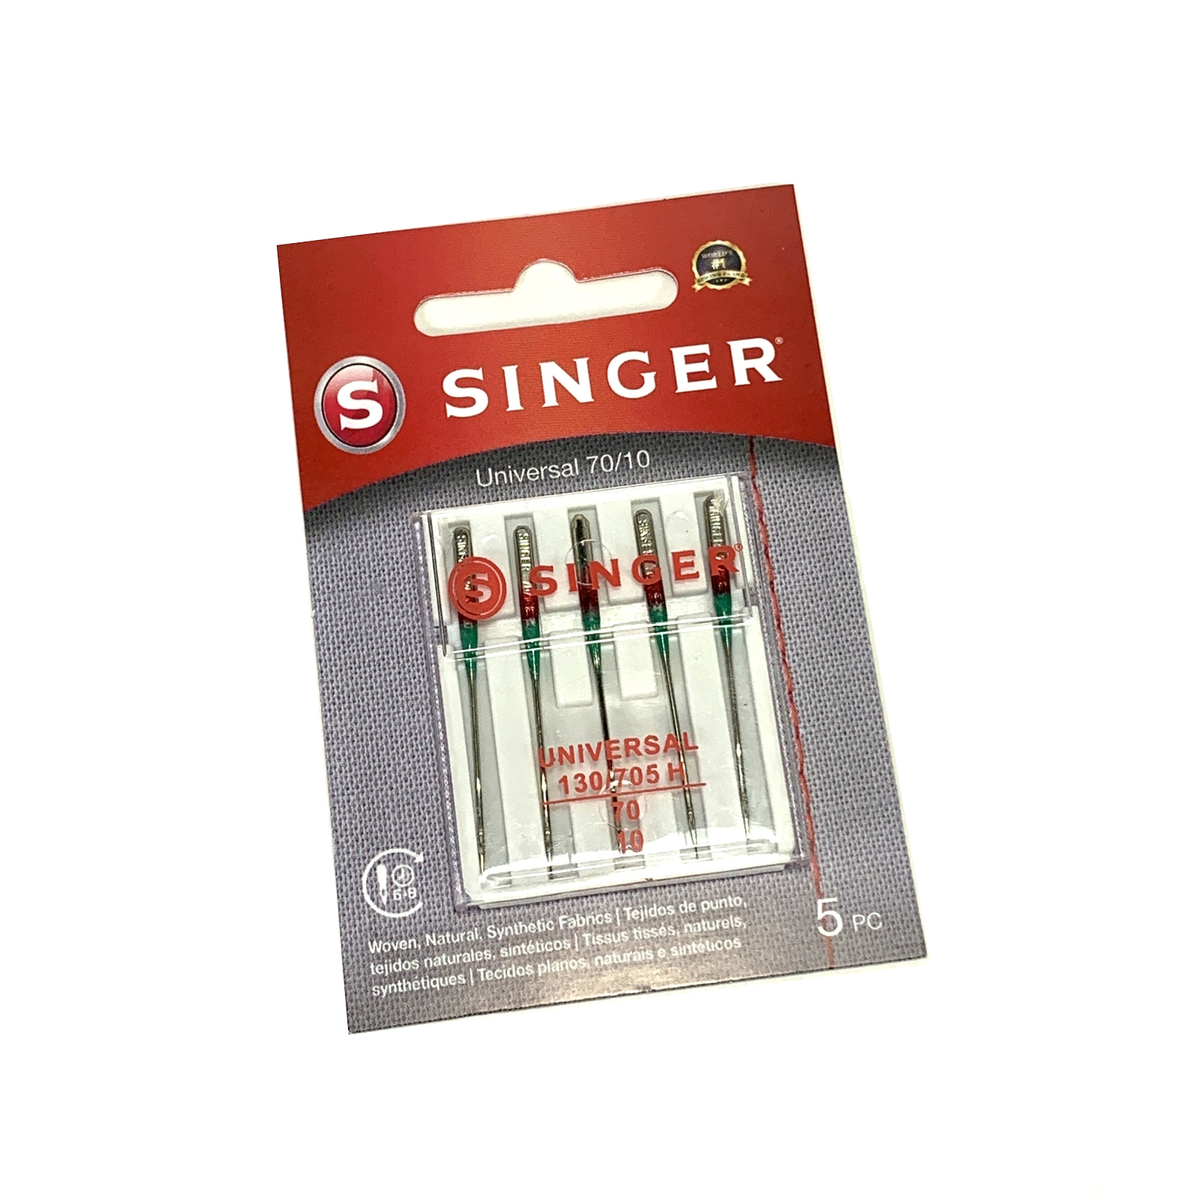 SINGER Making The Cut Universal Sewing Machine Needles - 15 Count -  Assorted Sizes 80/12, 90/14, 100/16